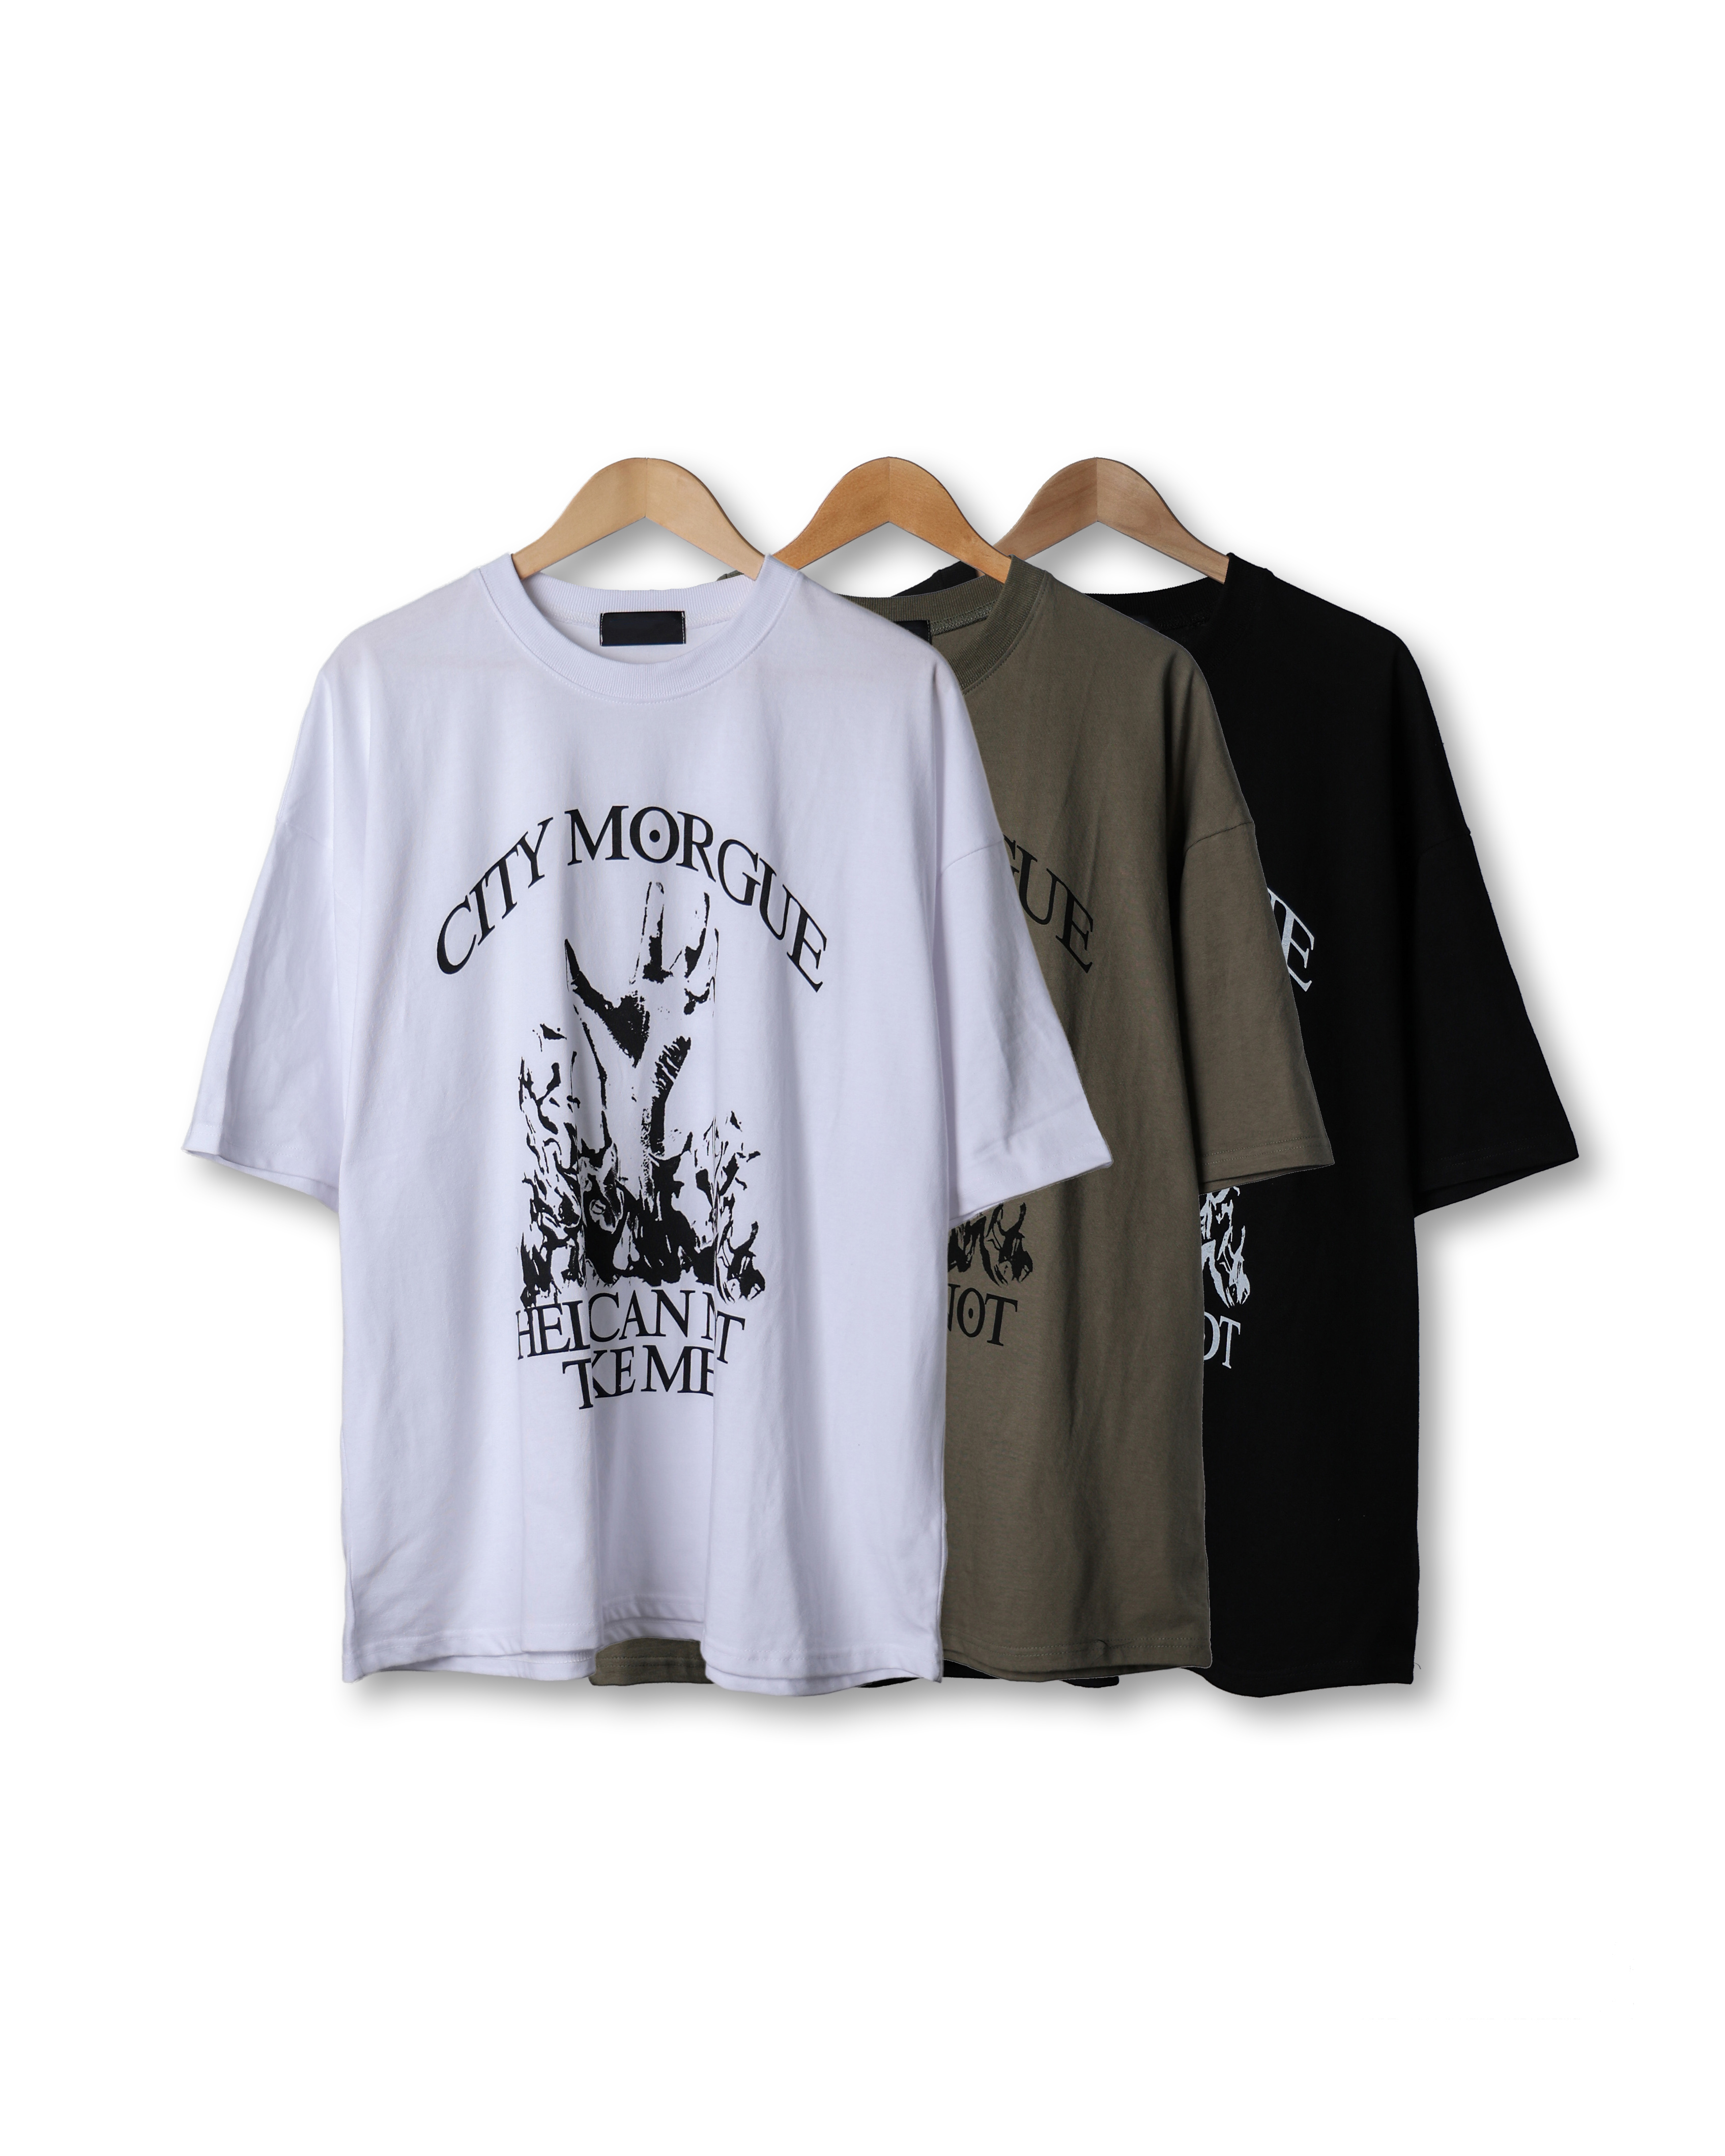 BROWN CITY MORGUE Graphic T Shirts (Black/Olive/White)